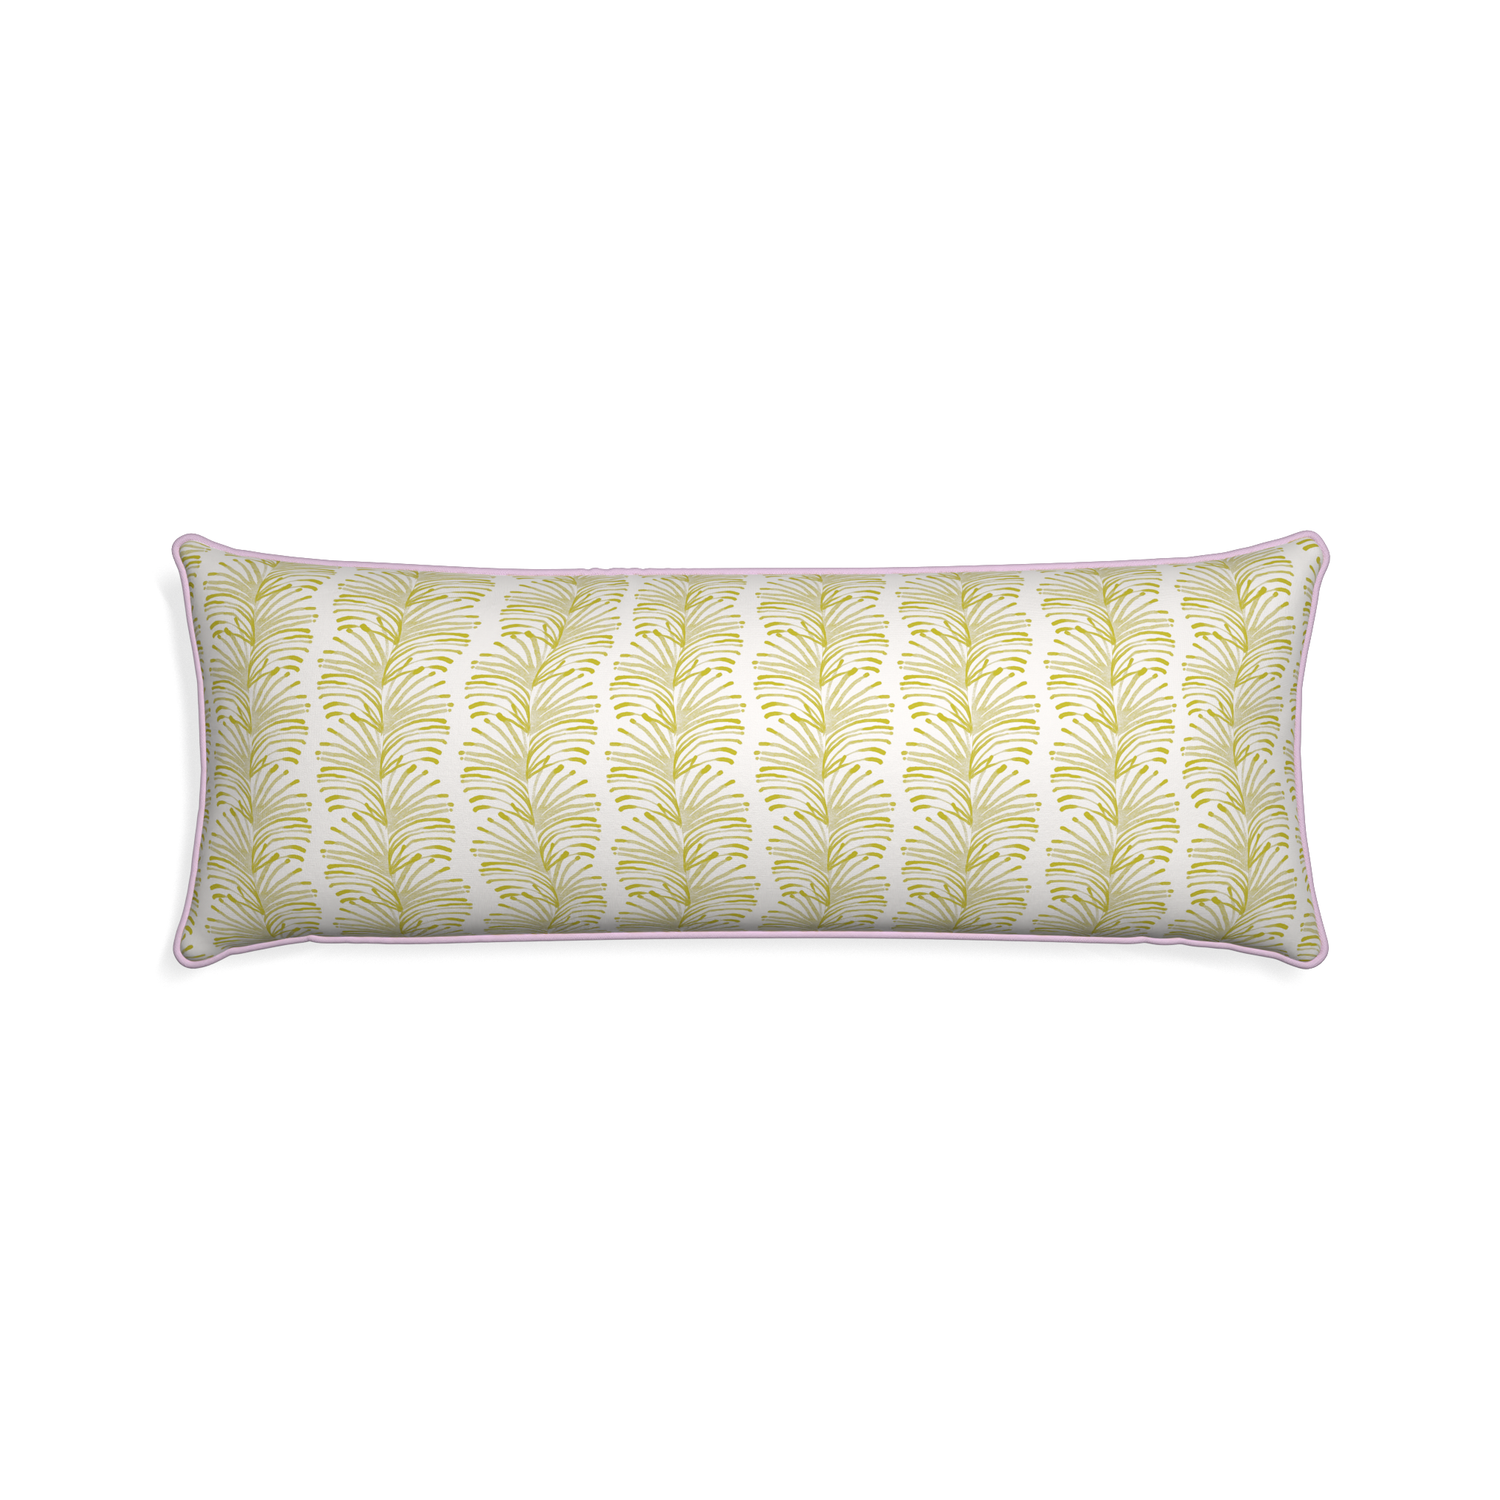 Xl-lumbar emma chartreuse custom pillow with l piping on white background